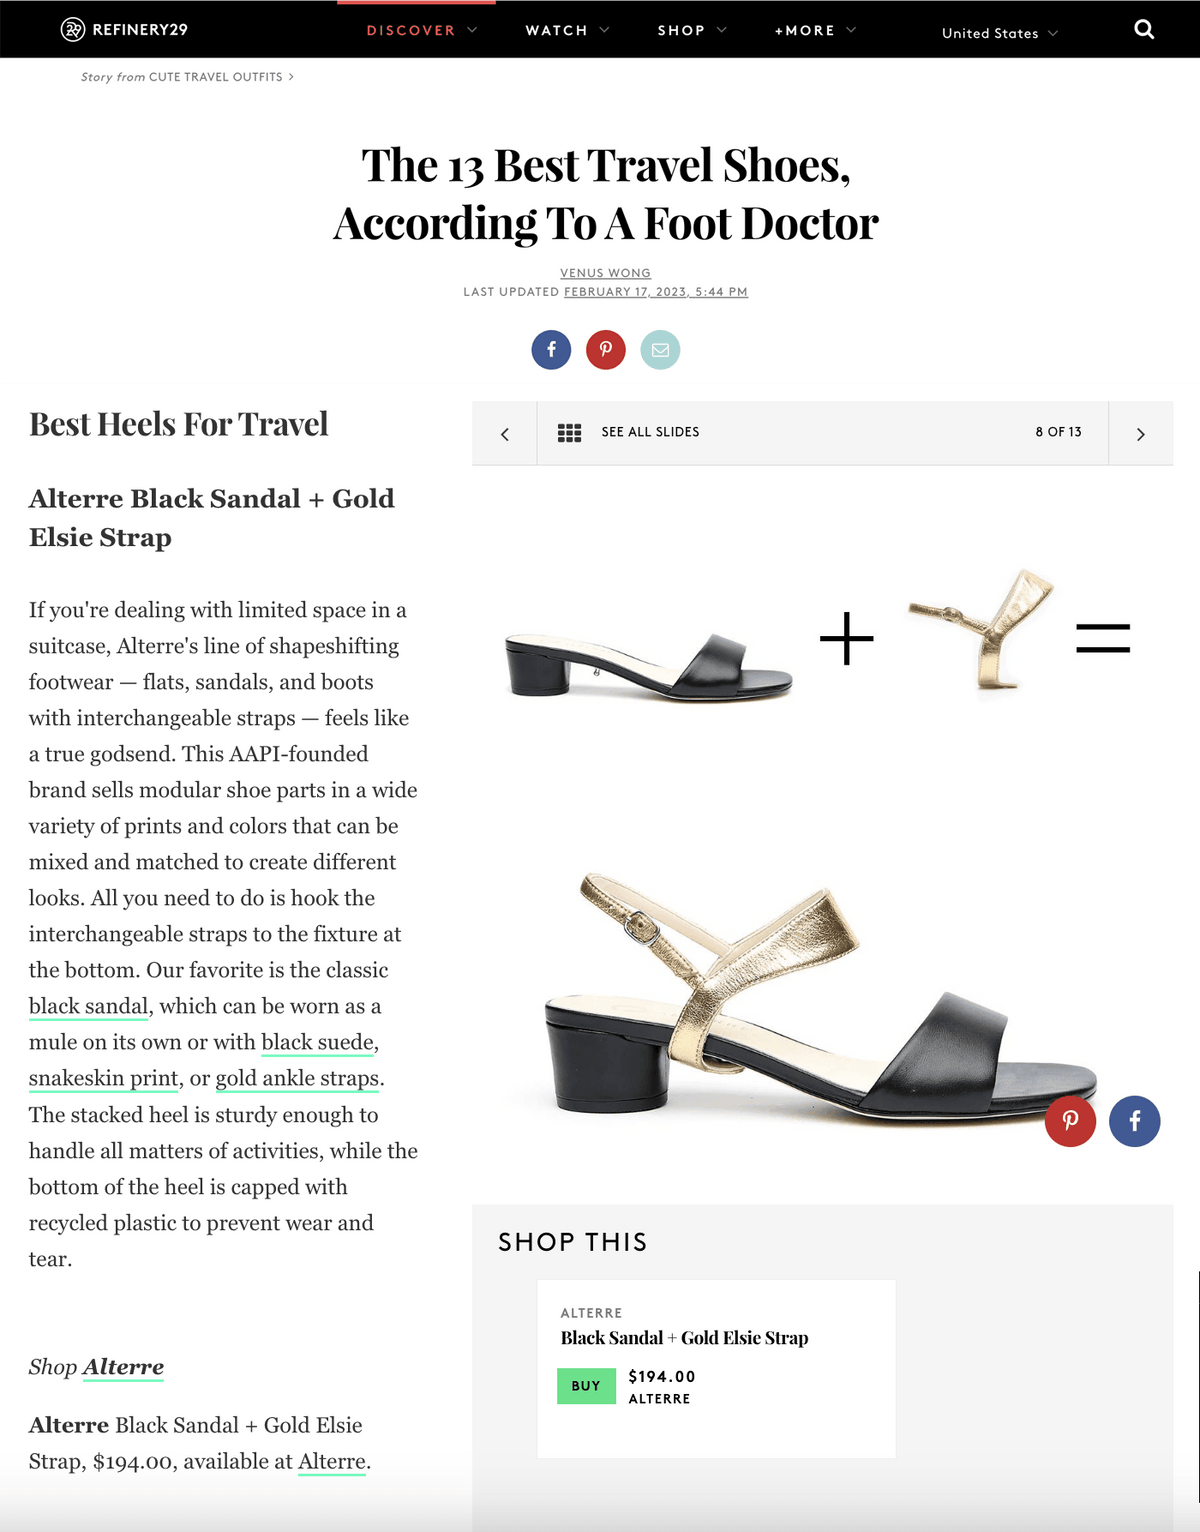 Alterre shoes featured on Refinery 29 - Customizable Black Sandals